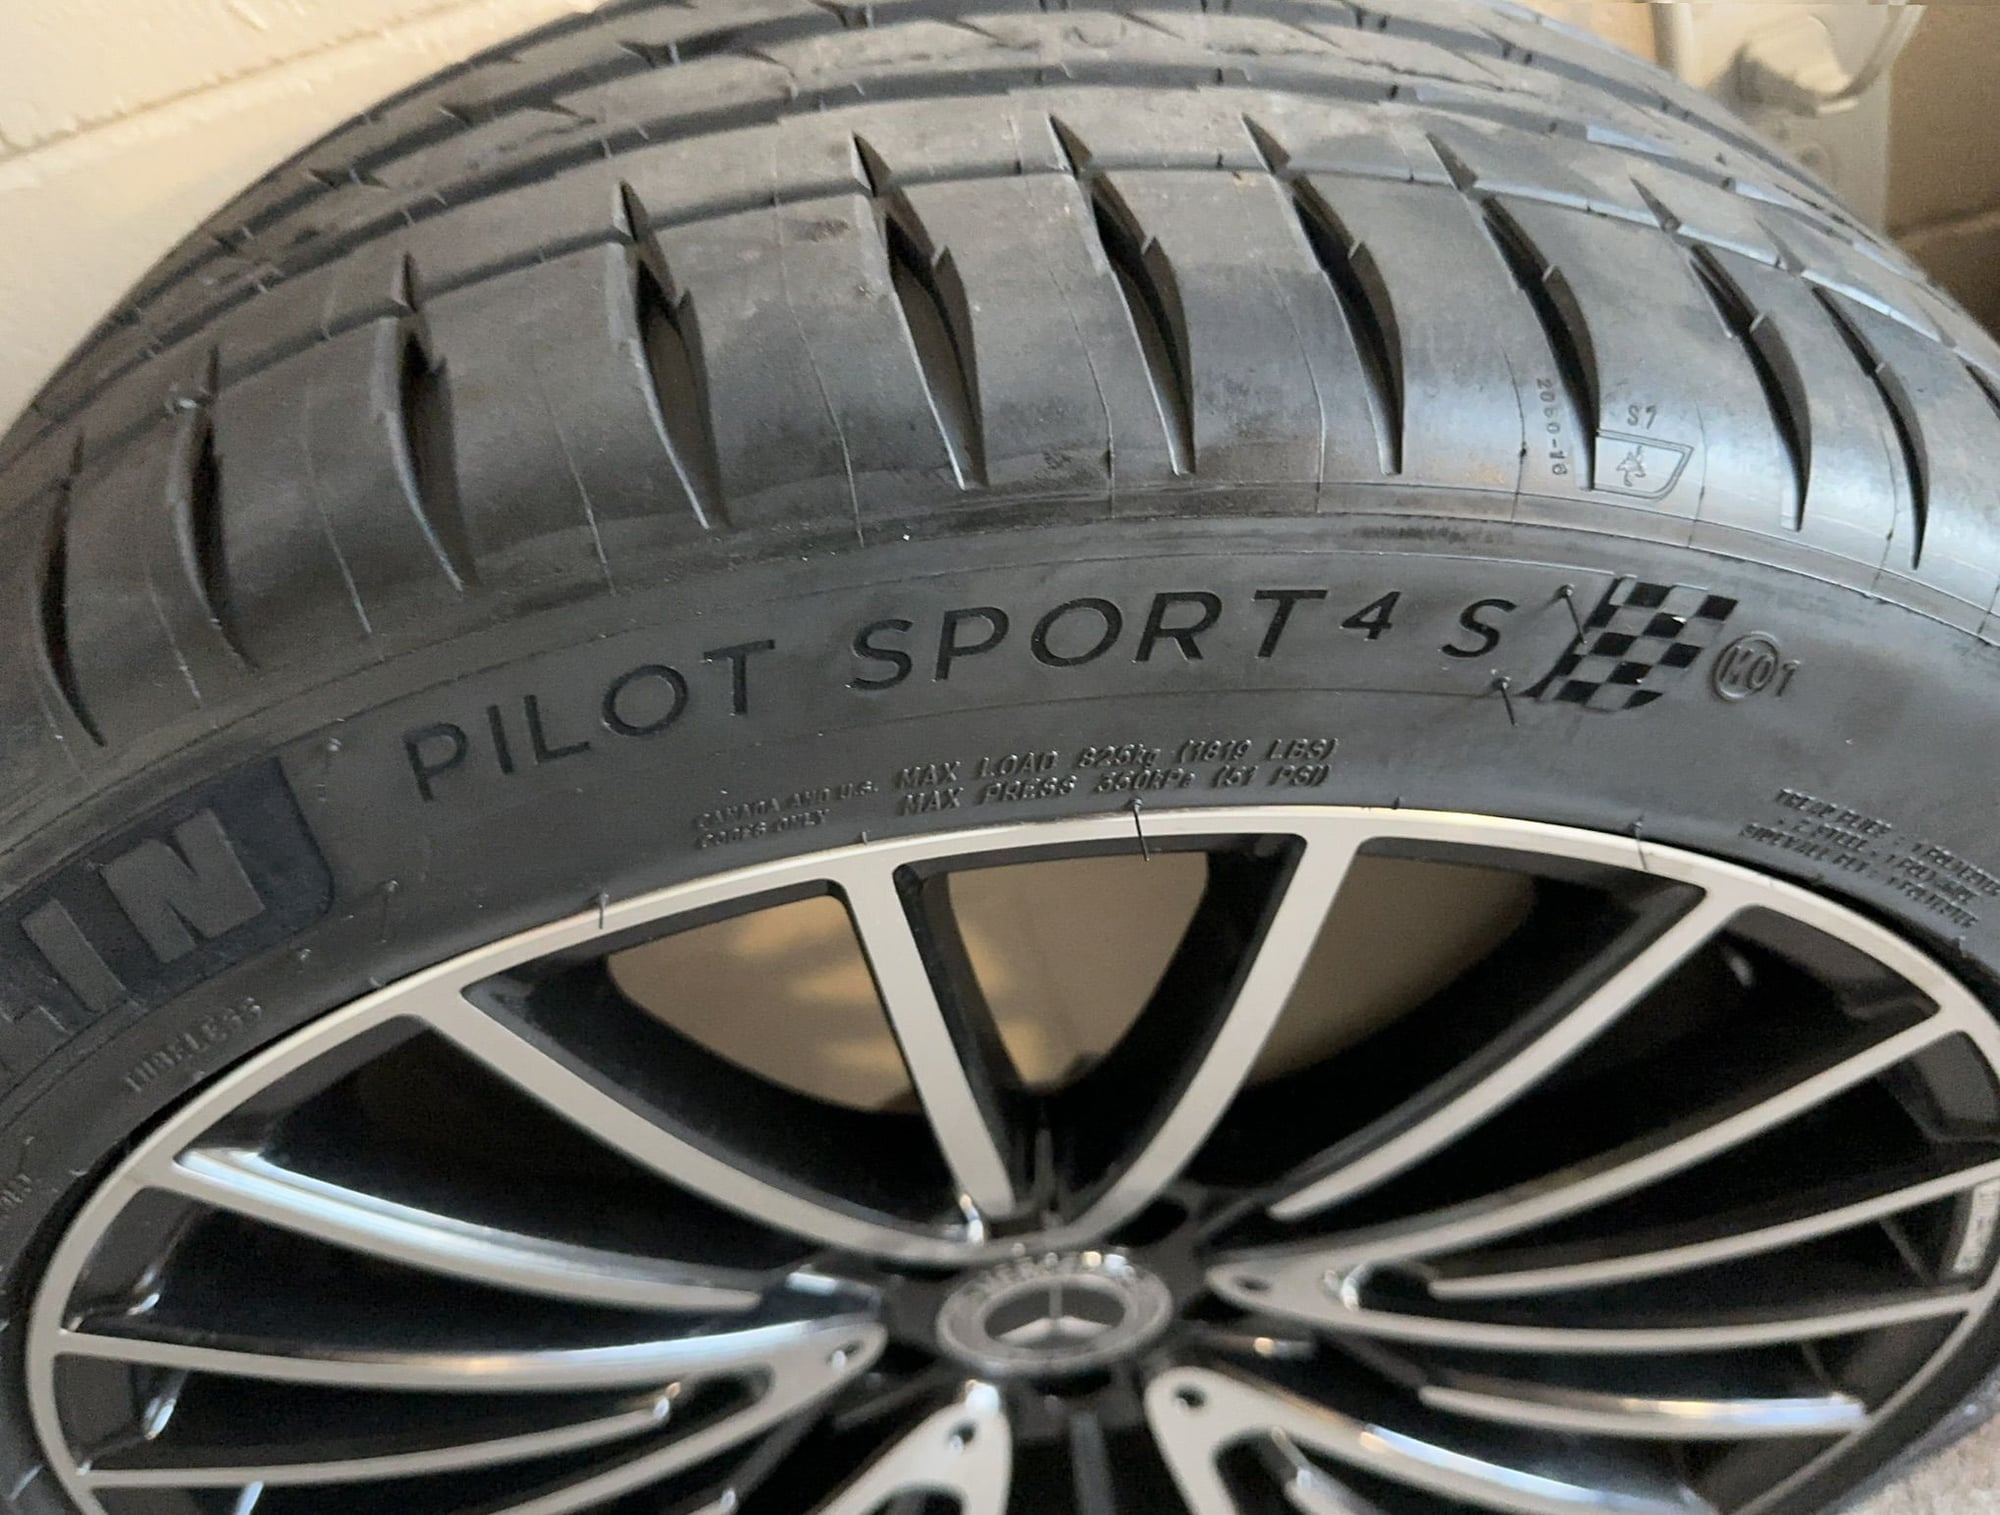 Wheels and Tires/Axles - 20" AMG style Wheels Michelin Sport 4s Tires - BRAND NEW. - New - 2021 to 2024 Mercedes-Benz S-Class - Celebration, FL 34747, United States